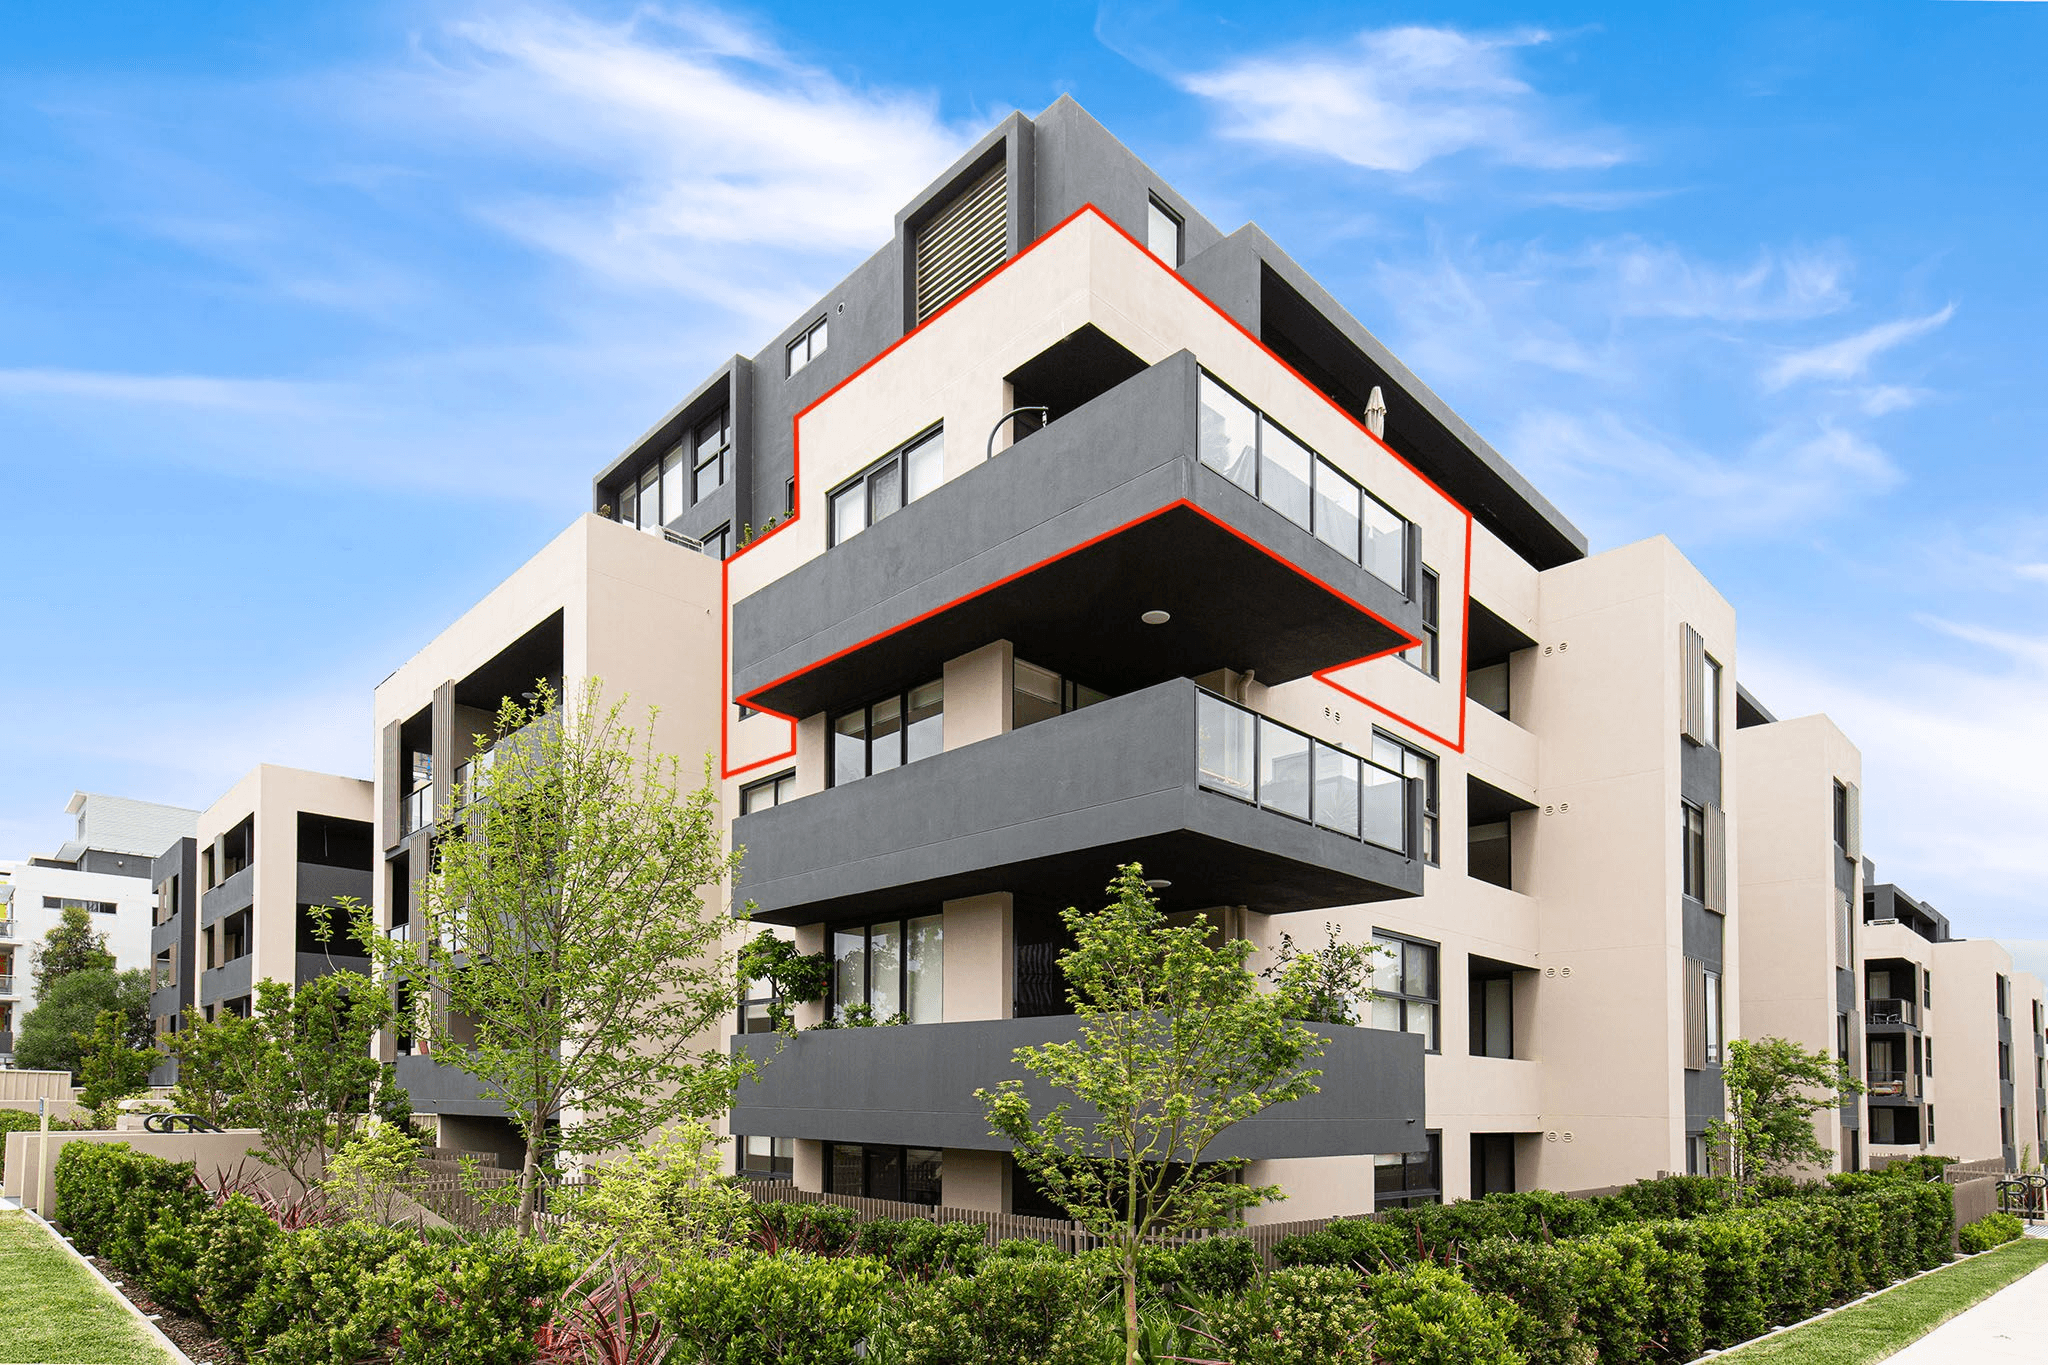 73/2 Lodge Street, Hornsby, New South Wales 2077